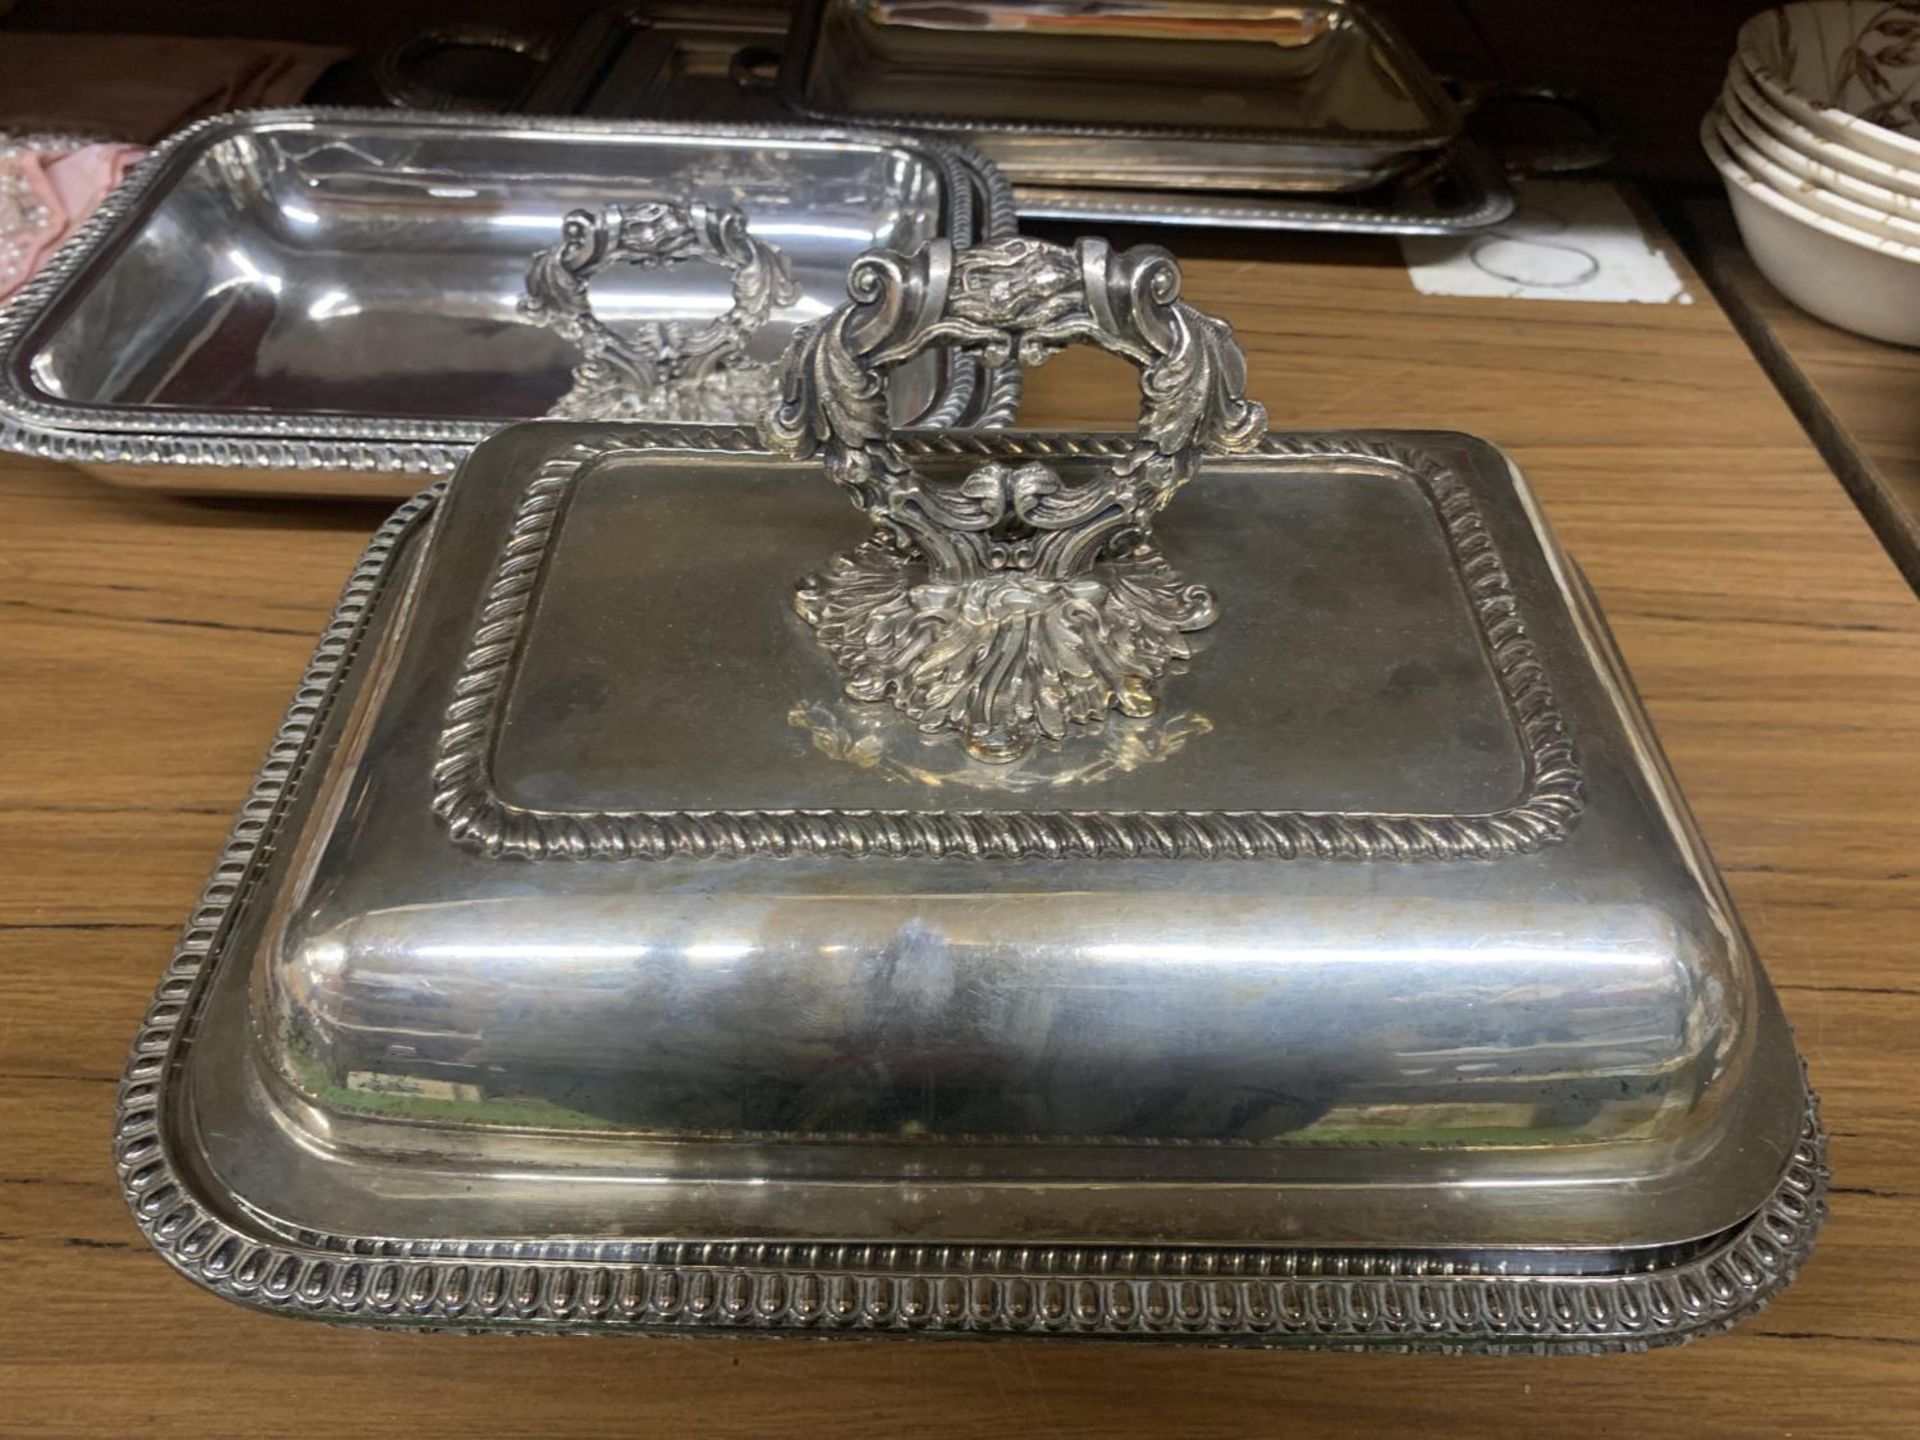 TWO SILVER PLATED HANDLED SERVING TRAYS PLUS FOUR SERVING DISHES, ONE WITH LID - Image 2 of 3